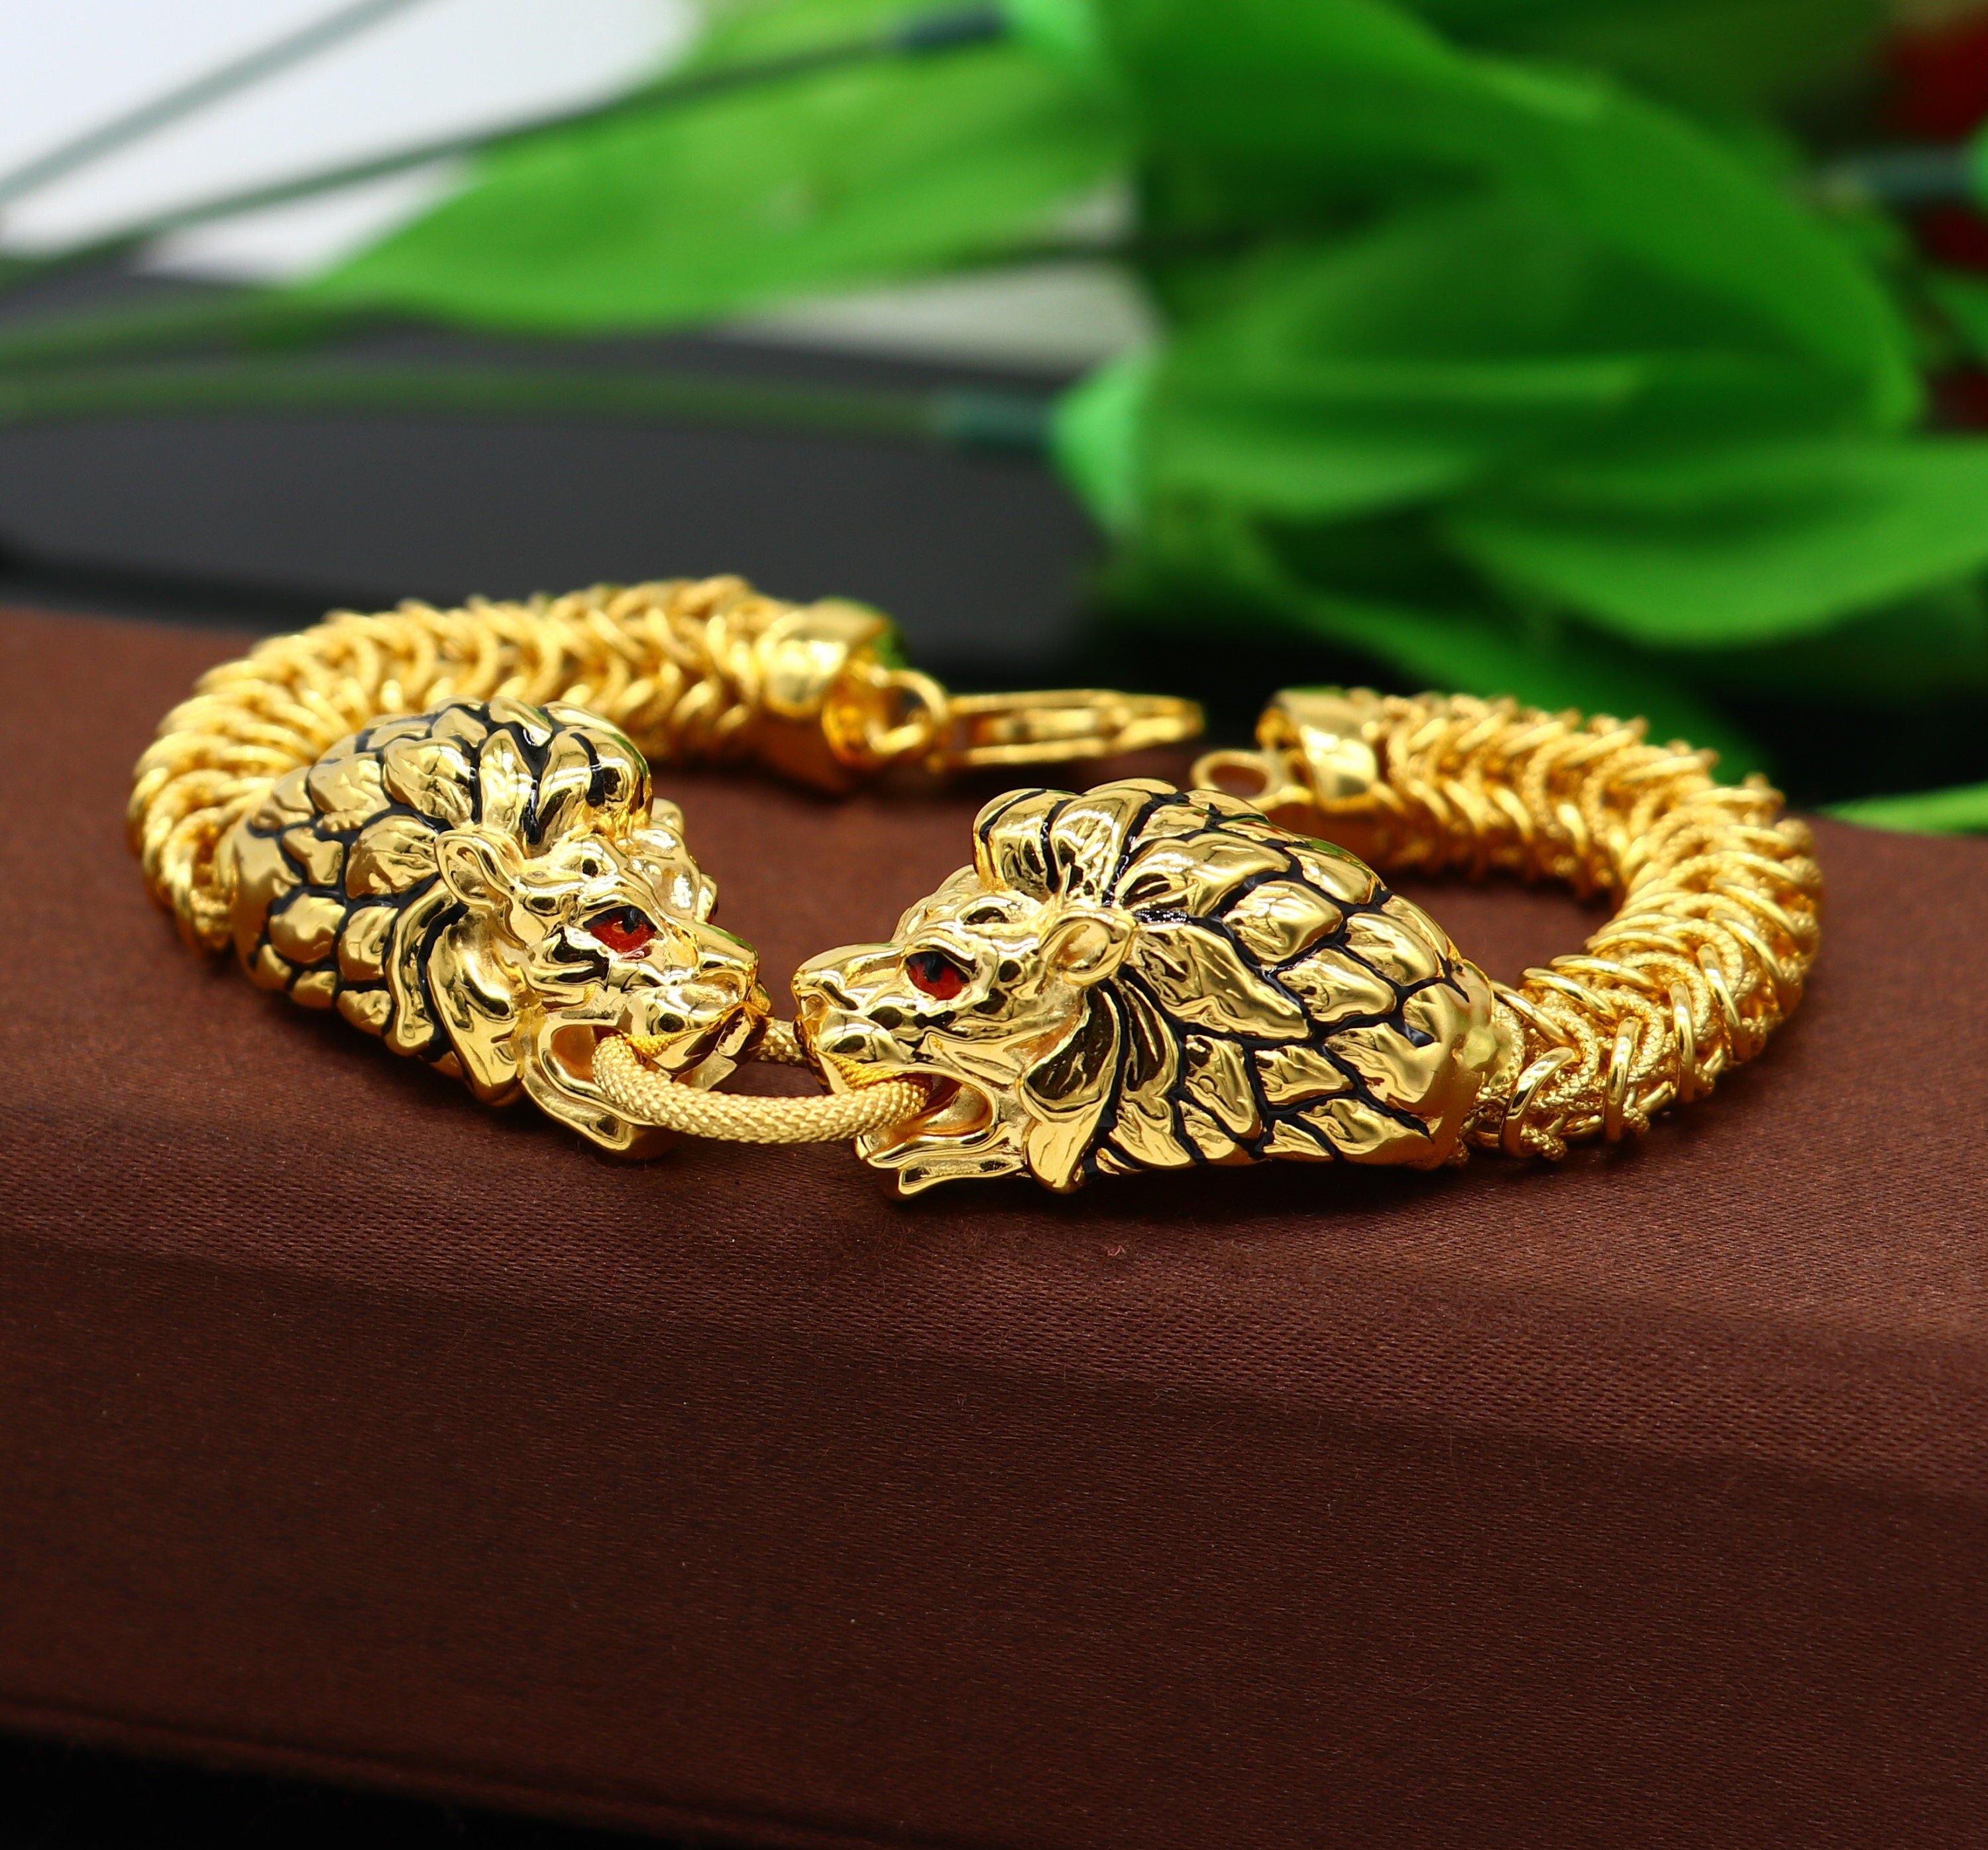 The king of the jungle. The lion head charm is made to impress. This lion  bracelet with a handcrafted finishing represents ambition and dedication.  Men's lion bracelet has a changeable clip to